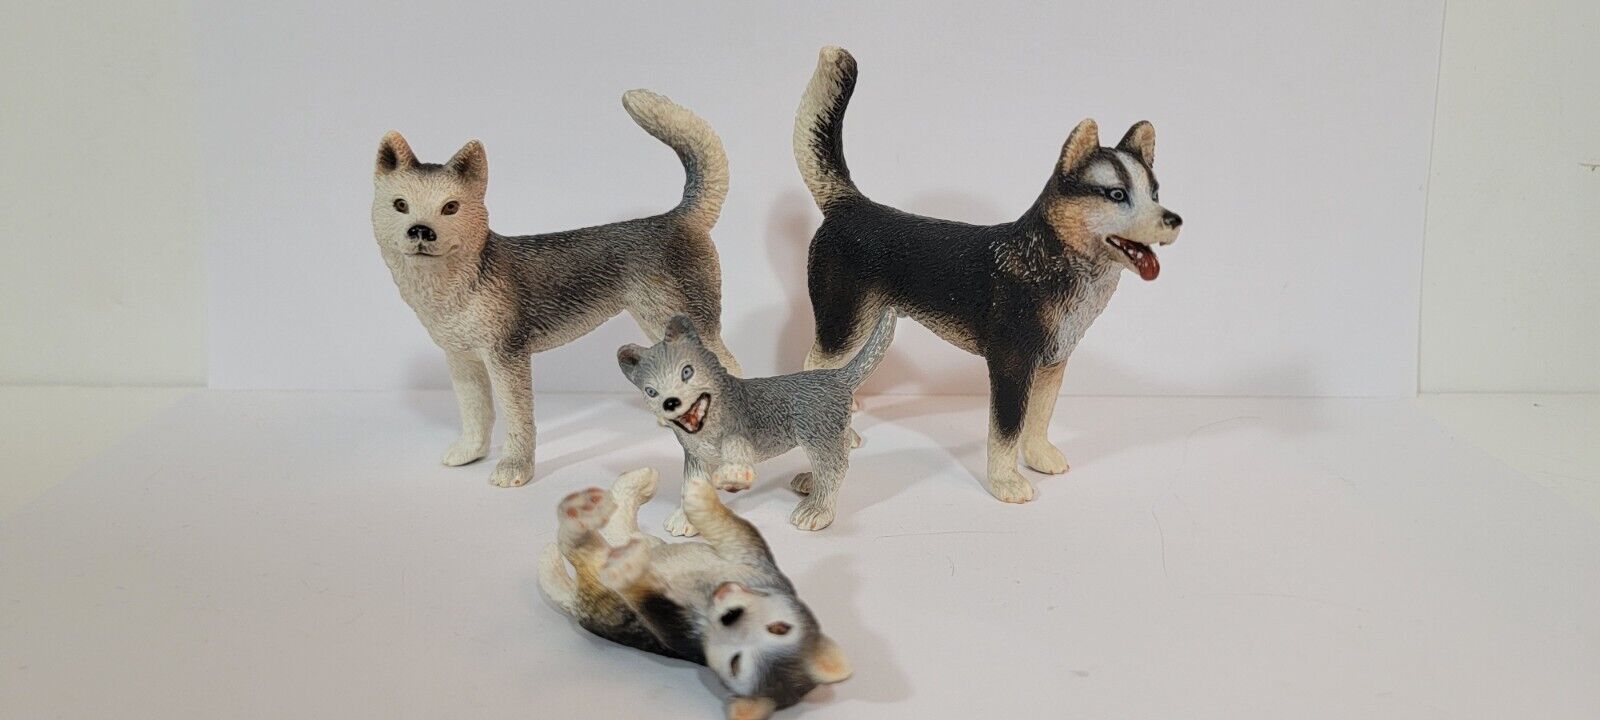 SCHLEICH 4 HUSKY DOG FAMILY Male Female Puppies Retired 16371 16372 16373 16374